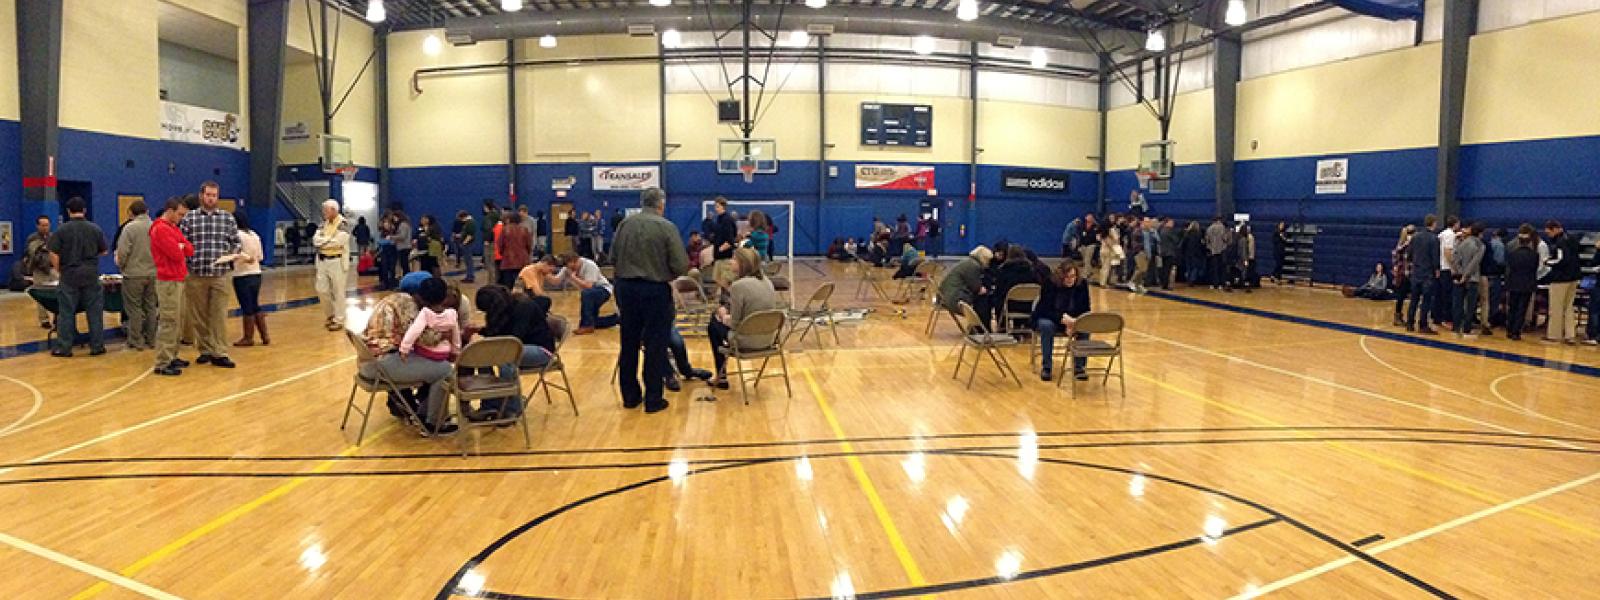 A photo of students, faculty and staff praying in the gym during Prayer Day at CIU.